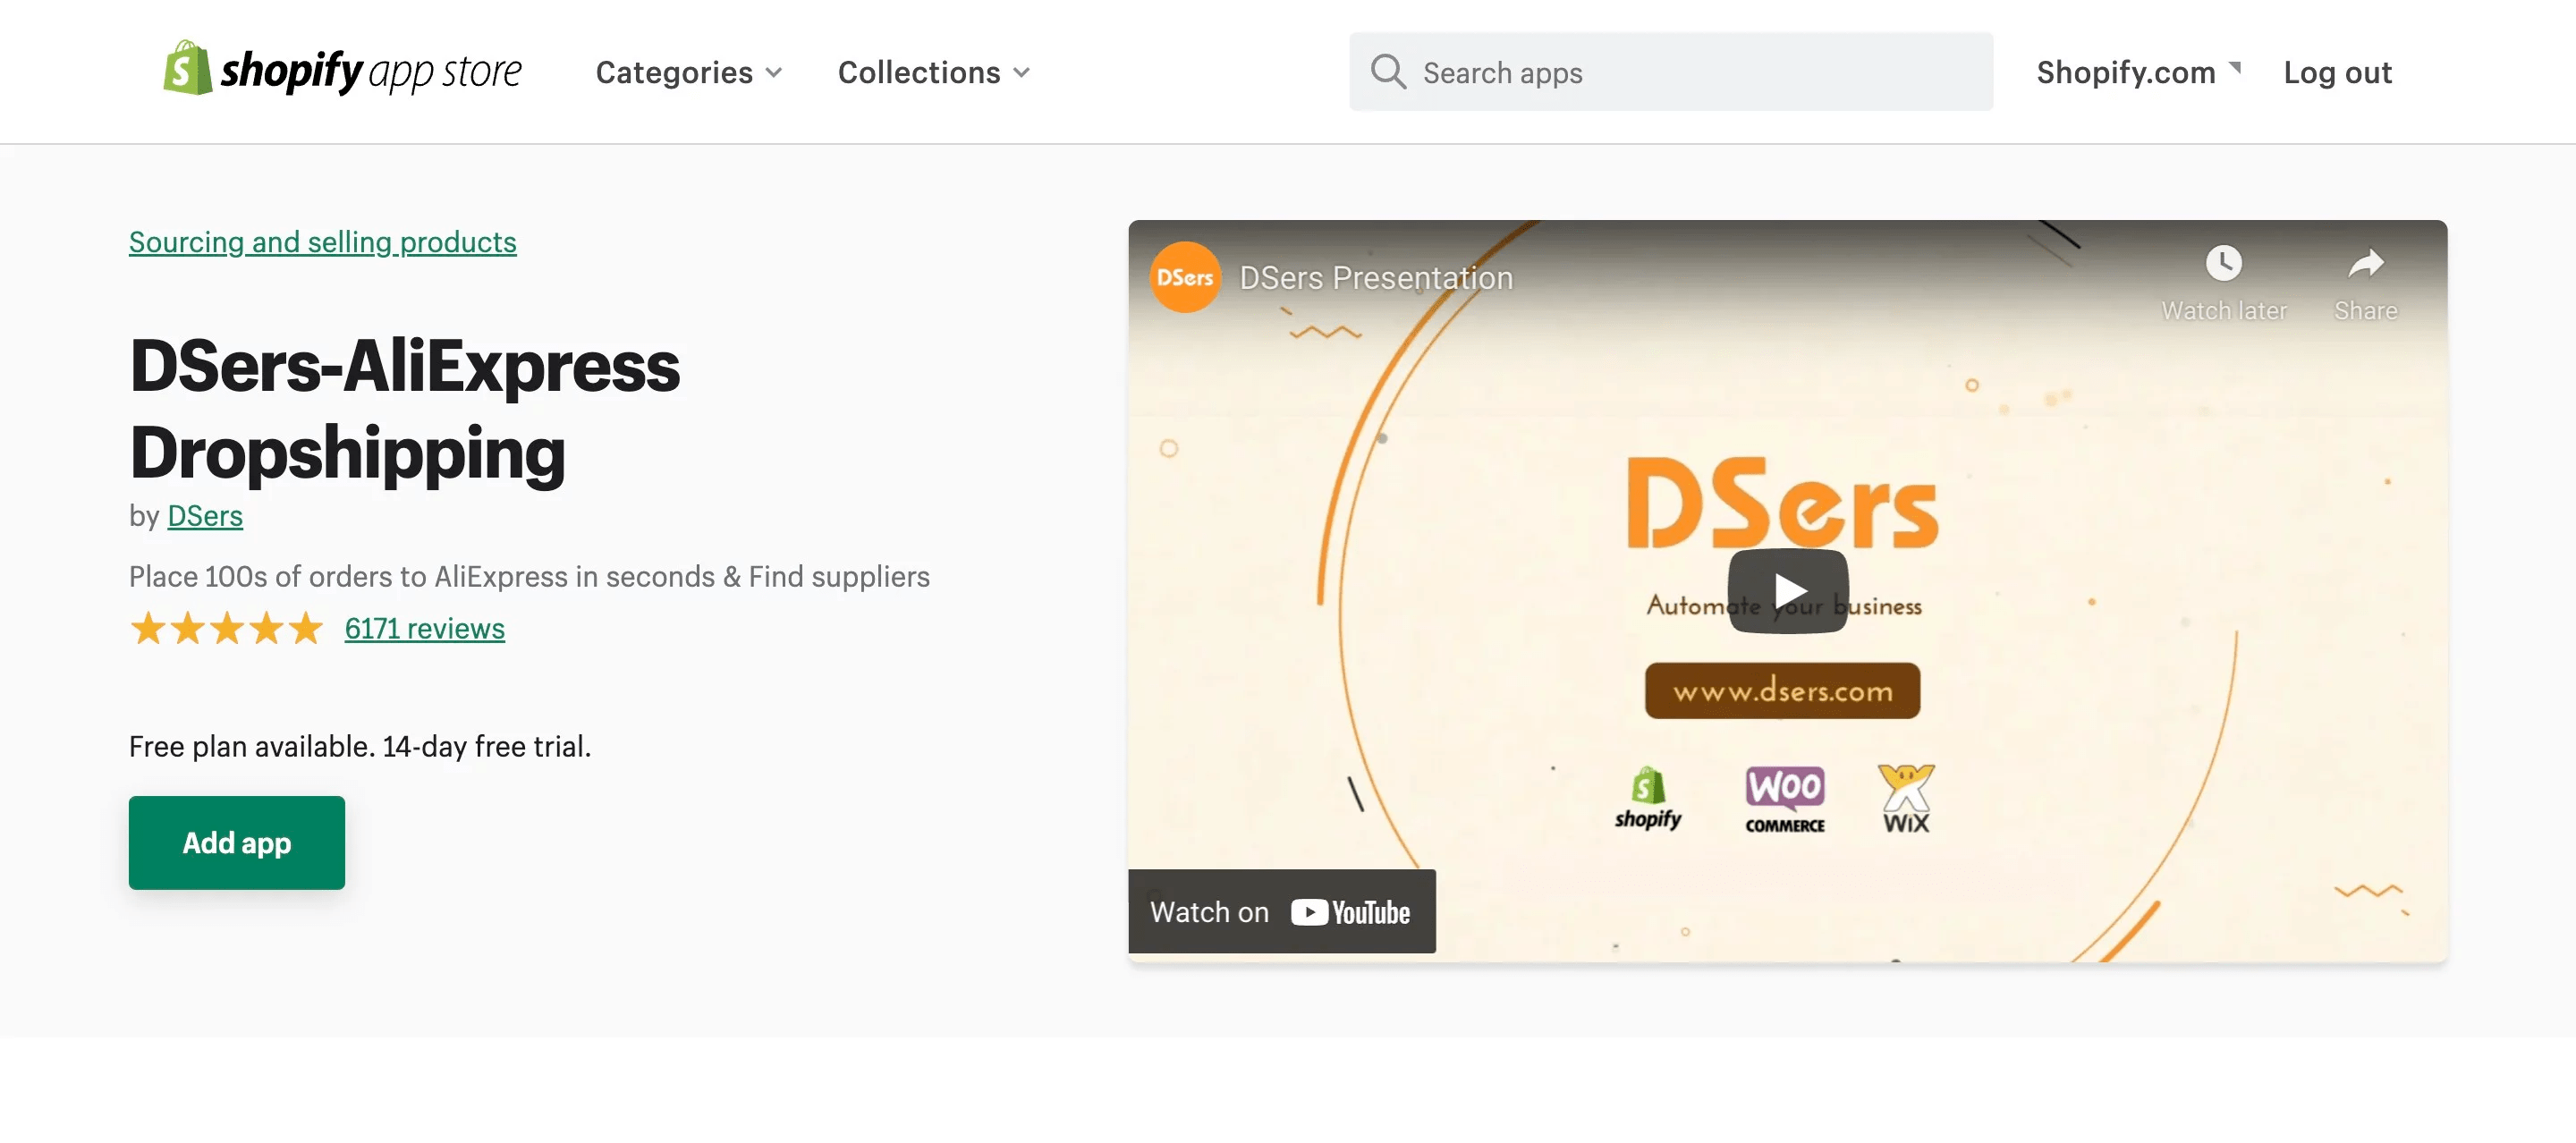 DSers: Official Partner of AliExpress